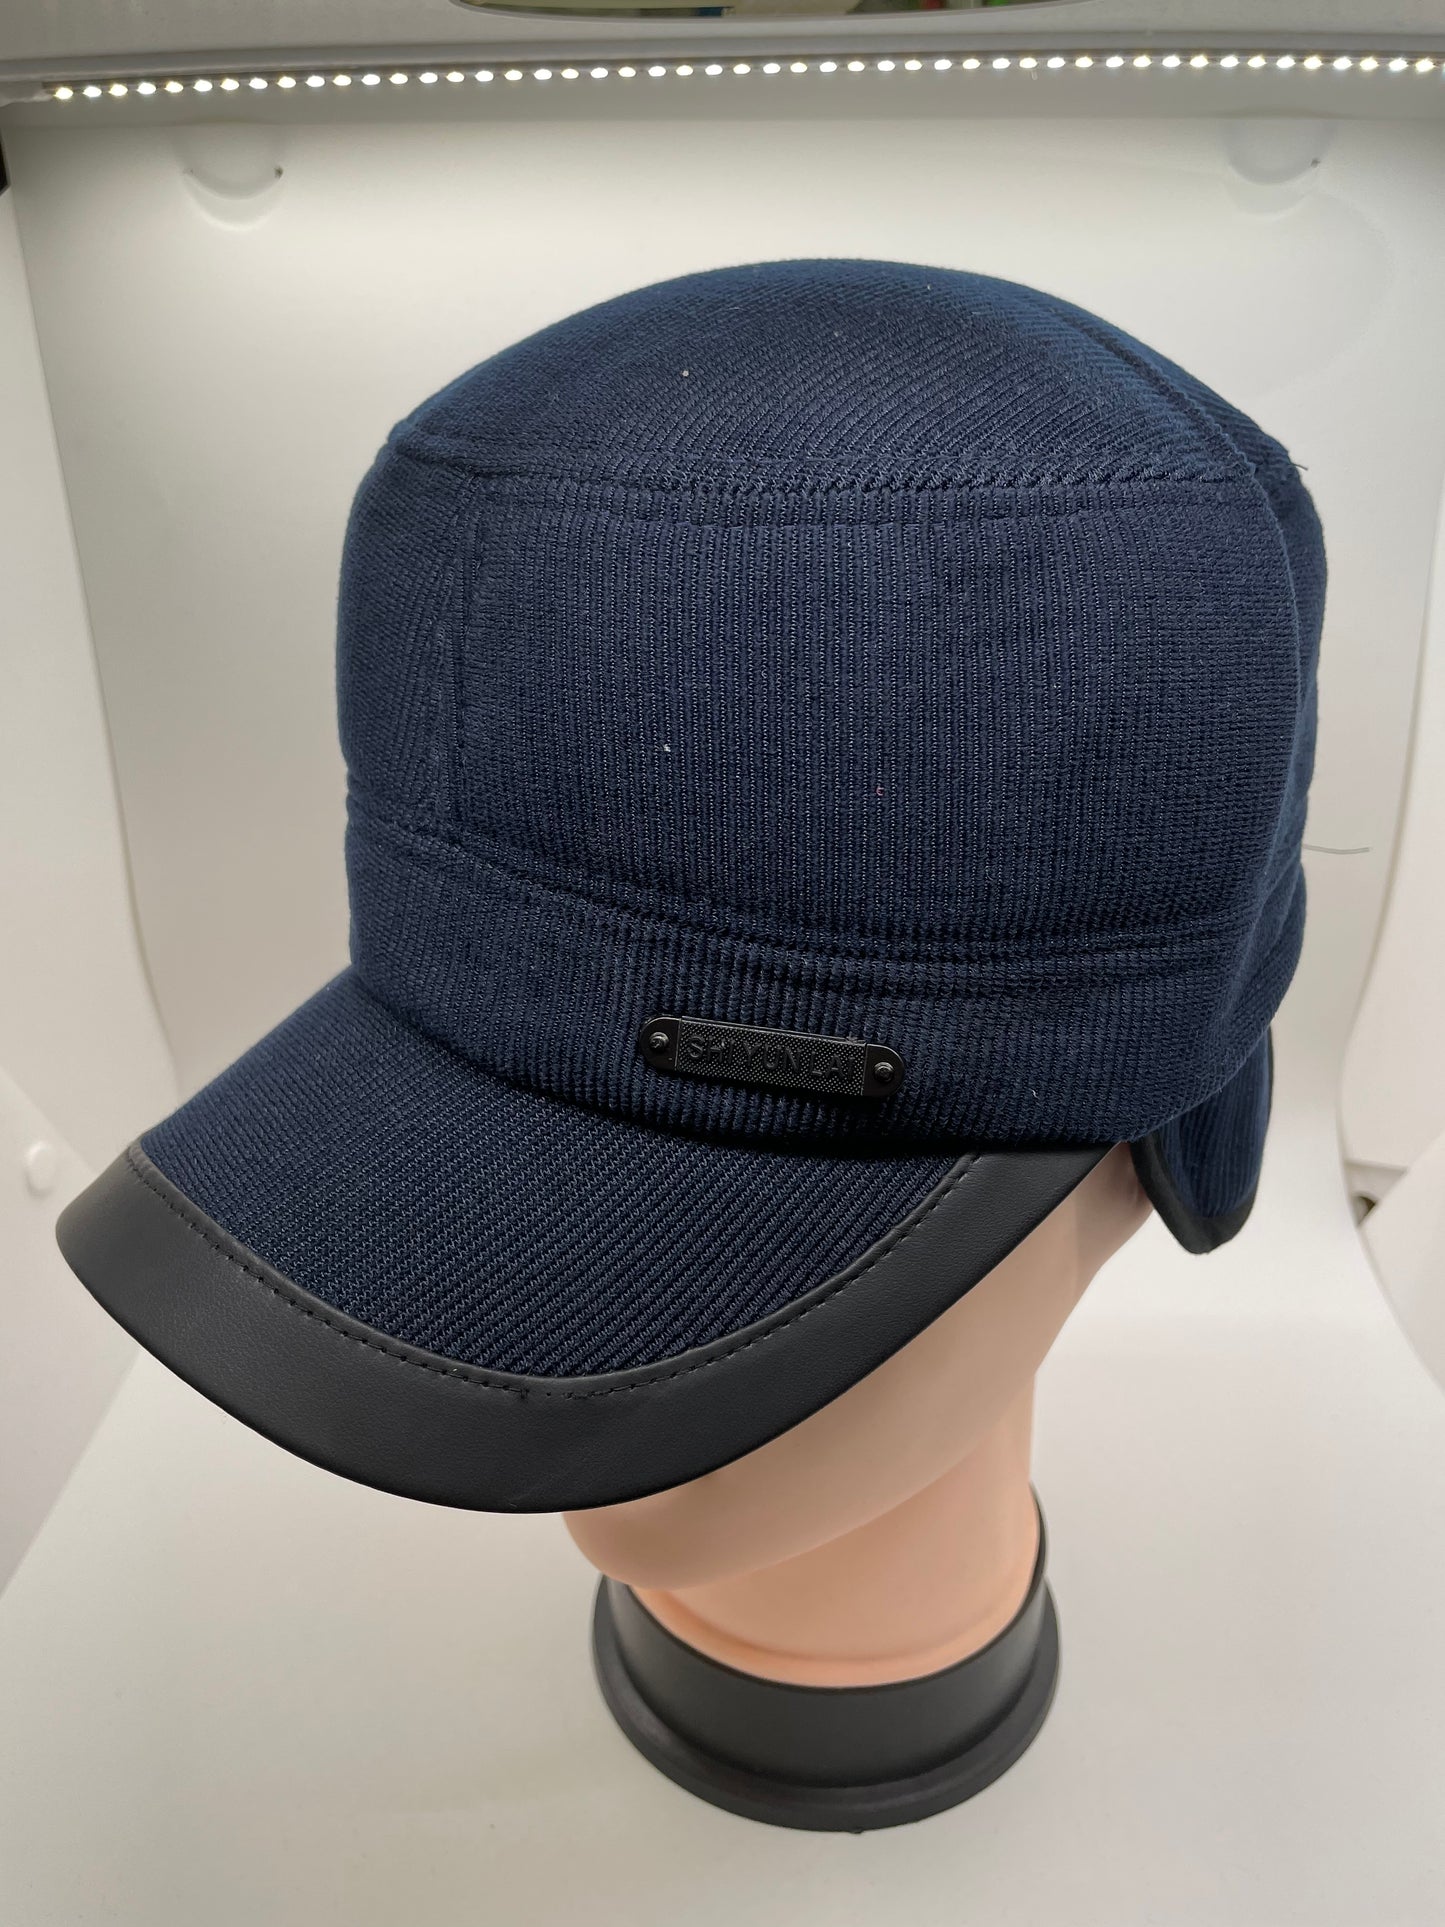 "Navy blue winter hat with ear flaps and a quilted texture"